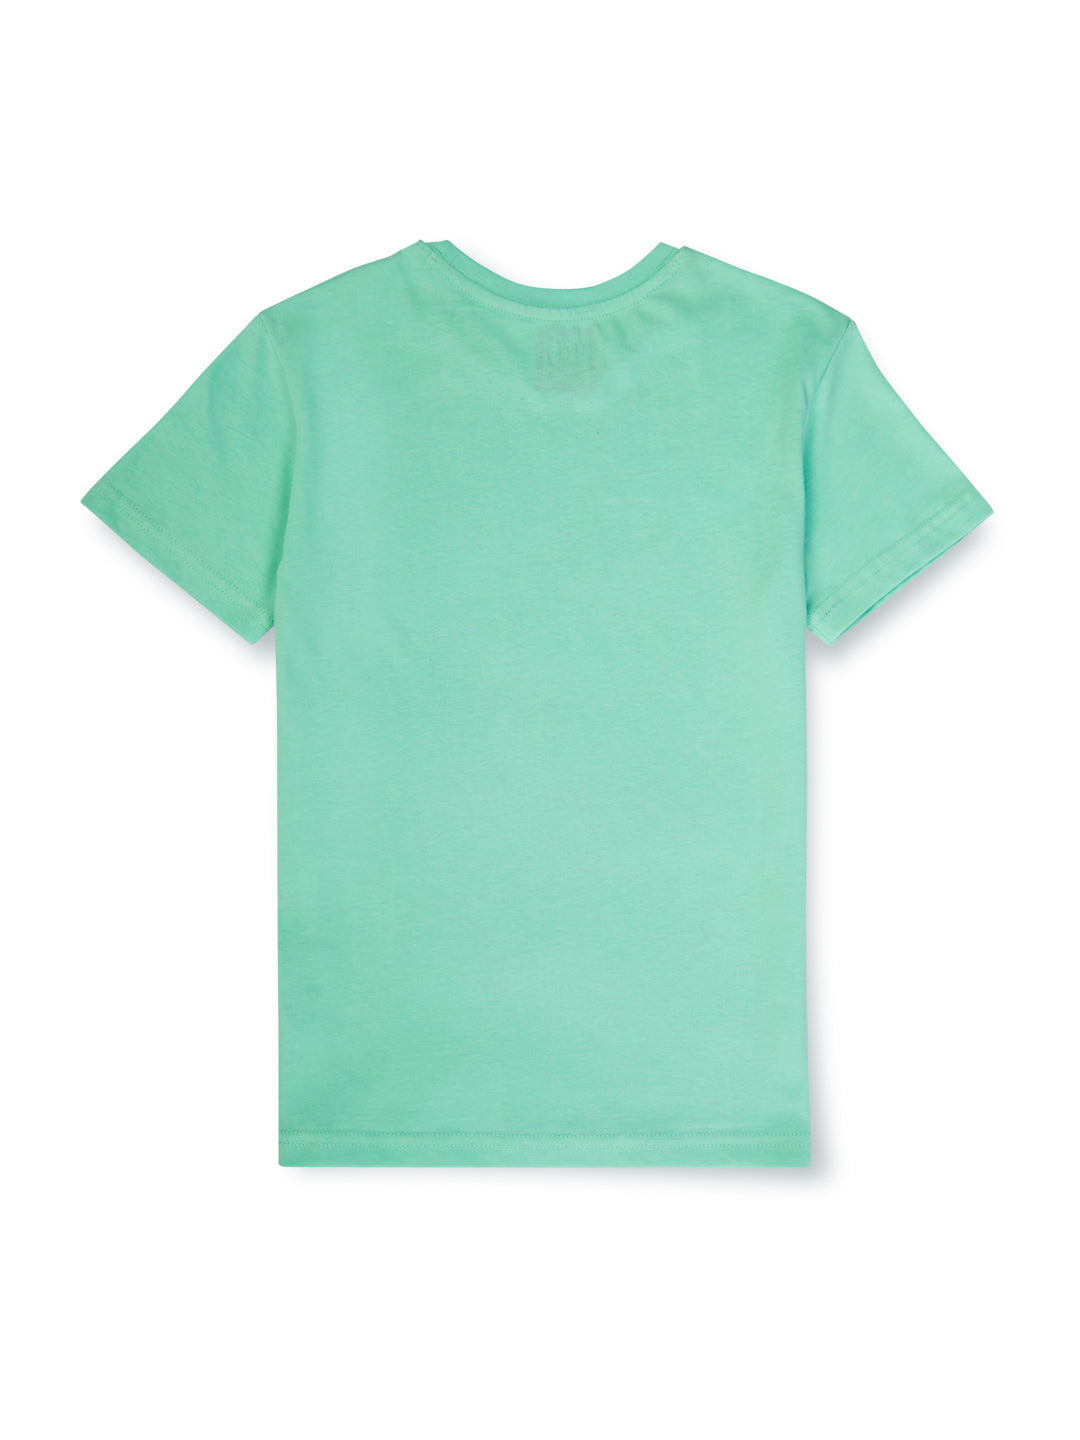 Boys Green Round Neck Knitted Cotton Printed T-Shirt